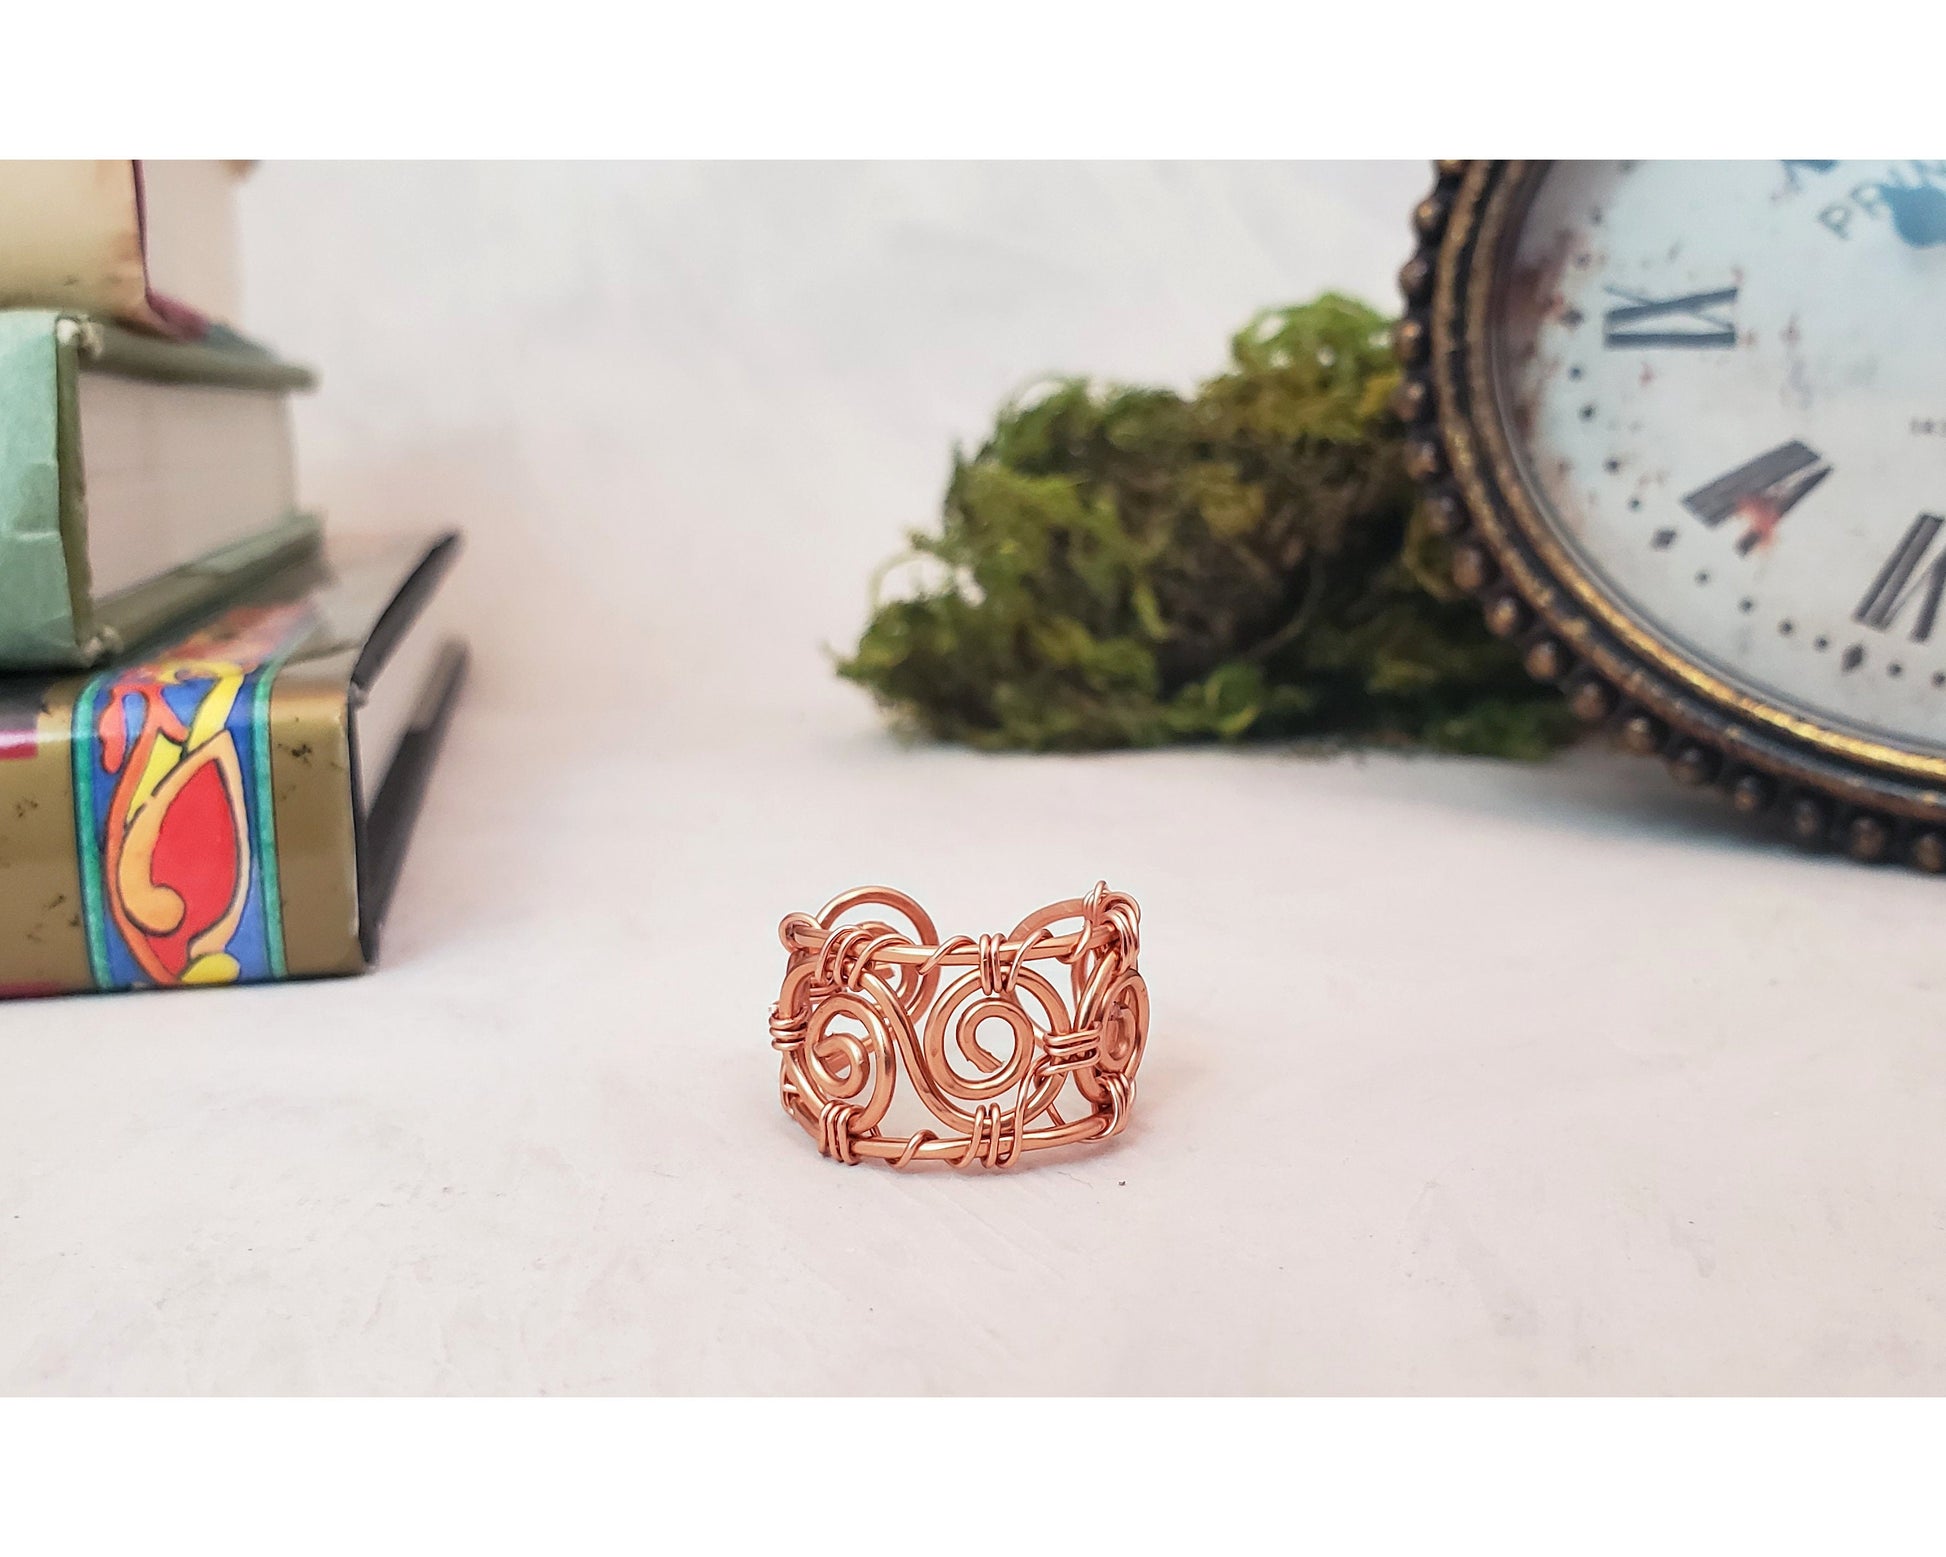 Wire Wrapped Ring With Filigree Scroll Design, Unisex, Celtic, Renaissance, Medieval, Choice of Classic Colors and Metals